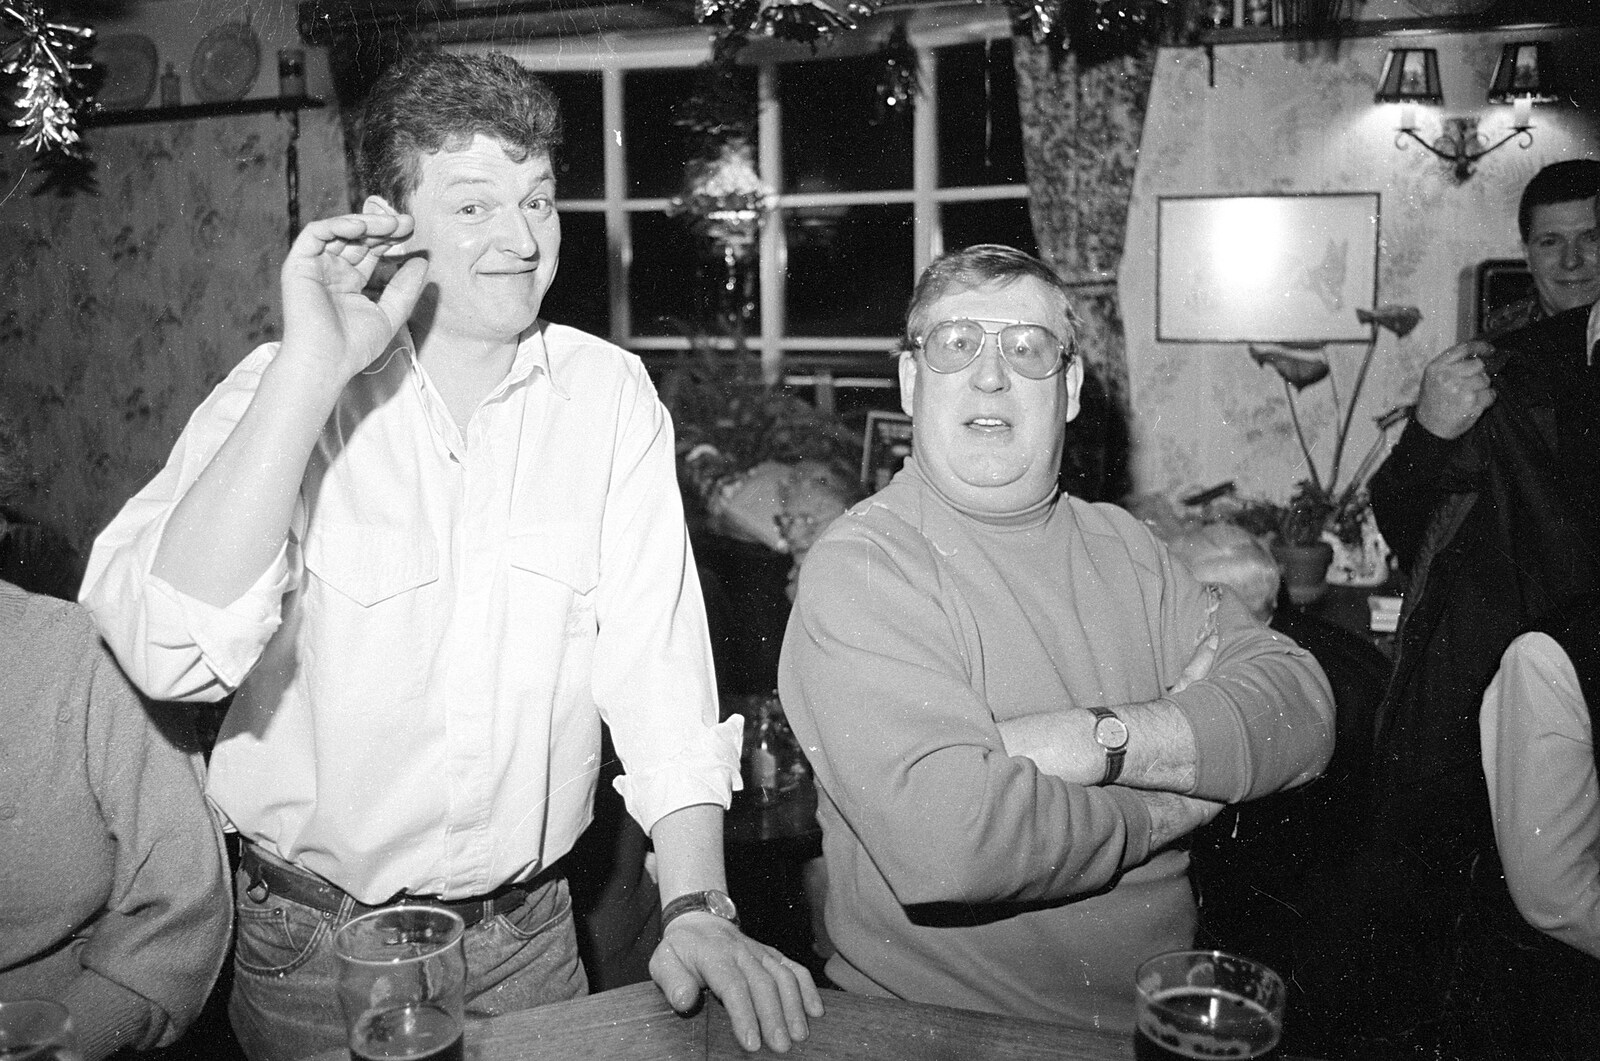 Trevor and Tony from New Year's Eve at the Swan Inn, Brome, Suffolk - 31st December 1992